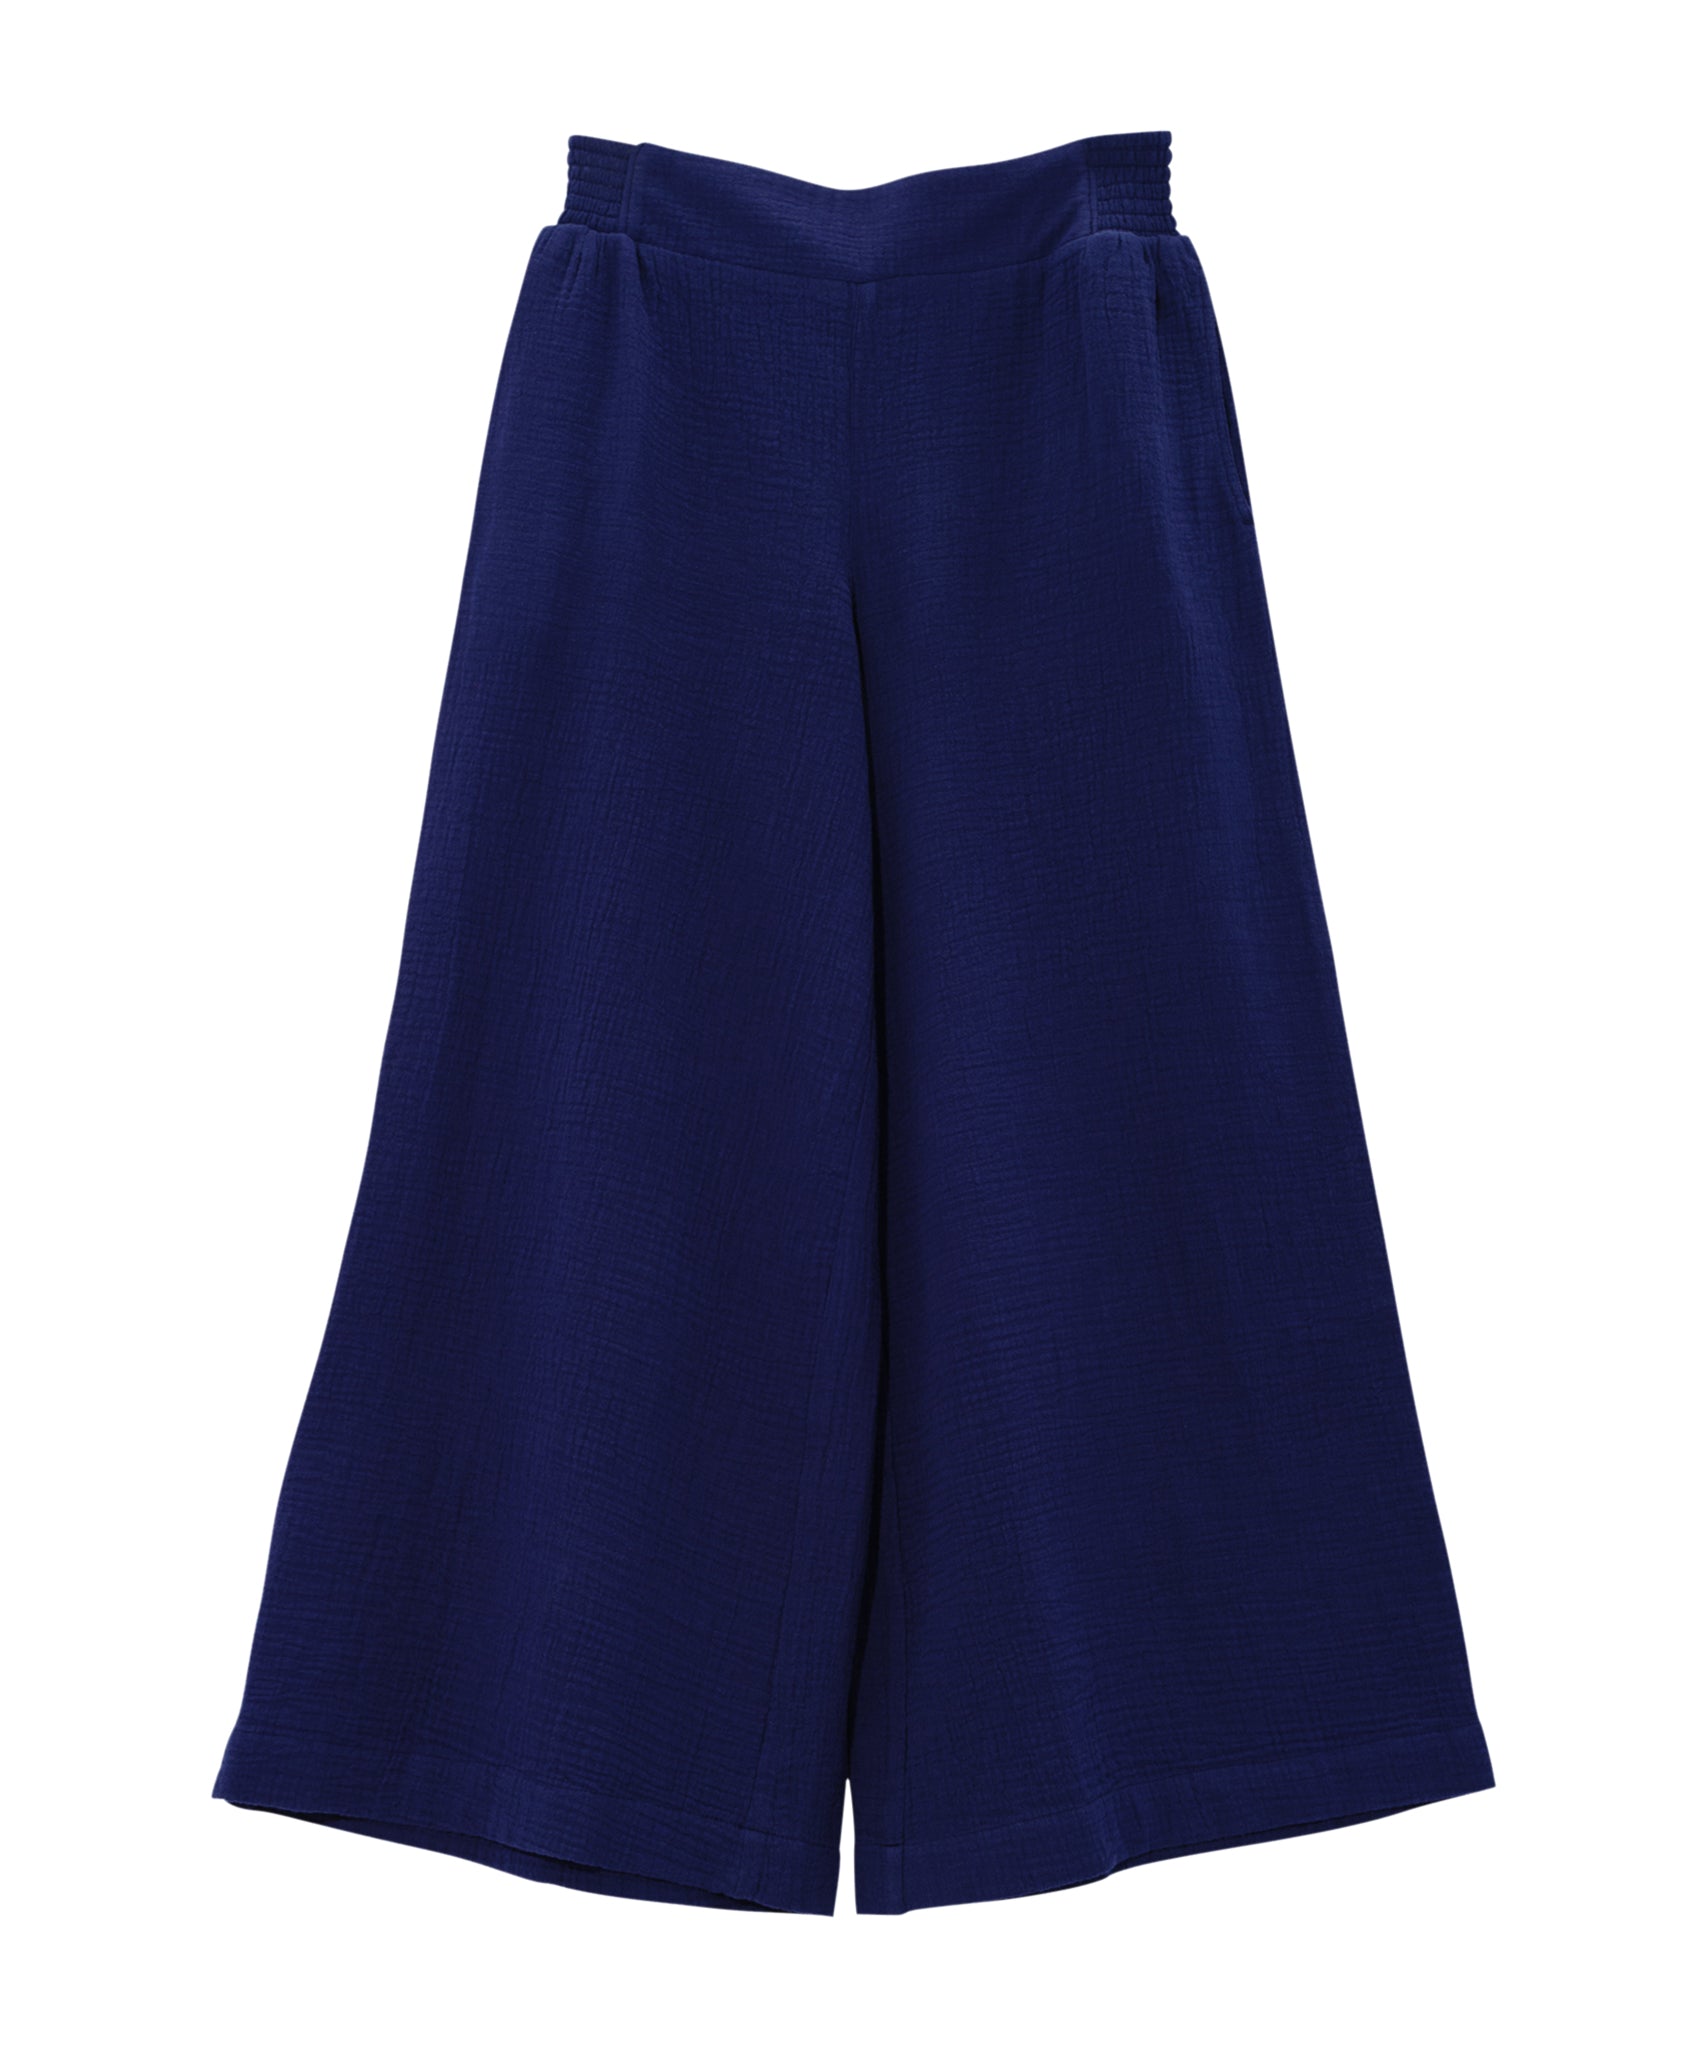 Supersoft Gauze Smocked Pants in color marine.